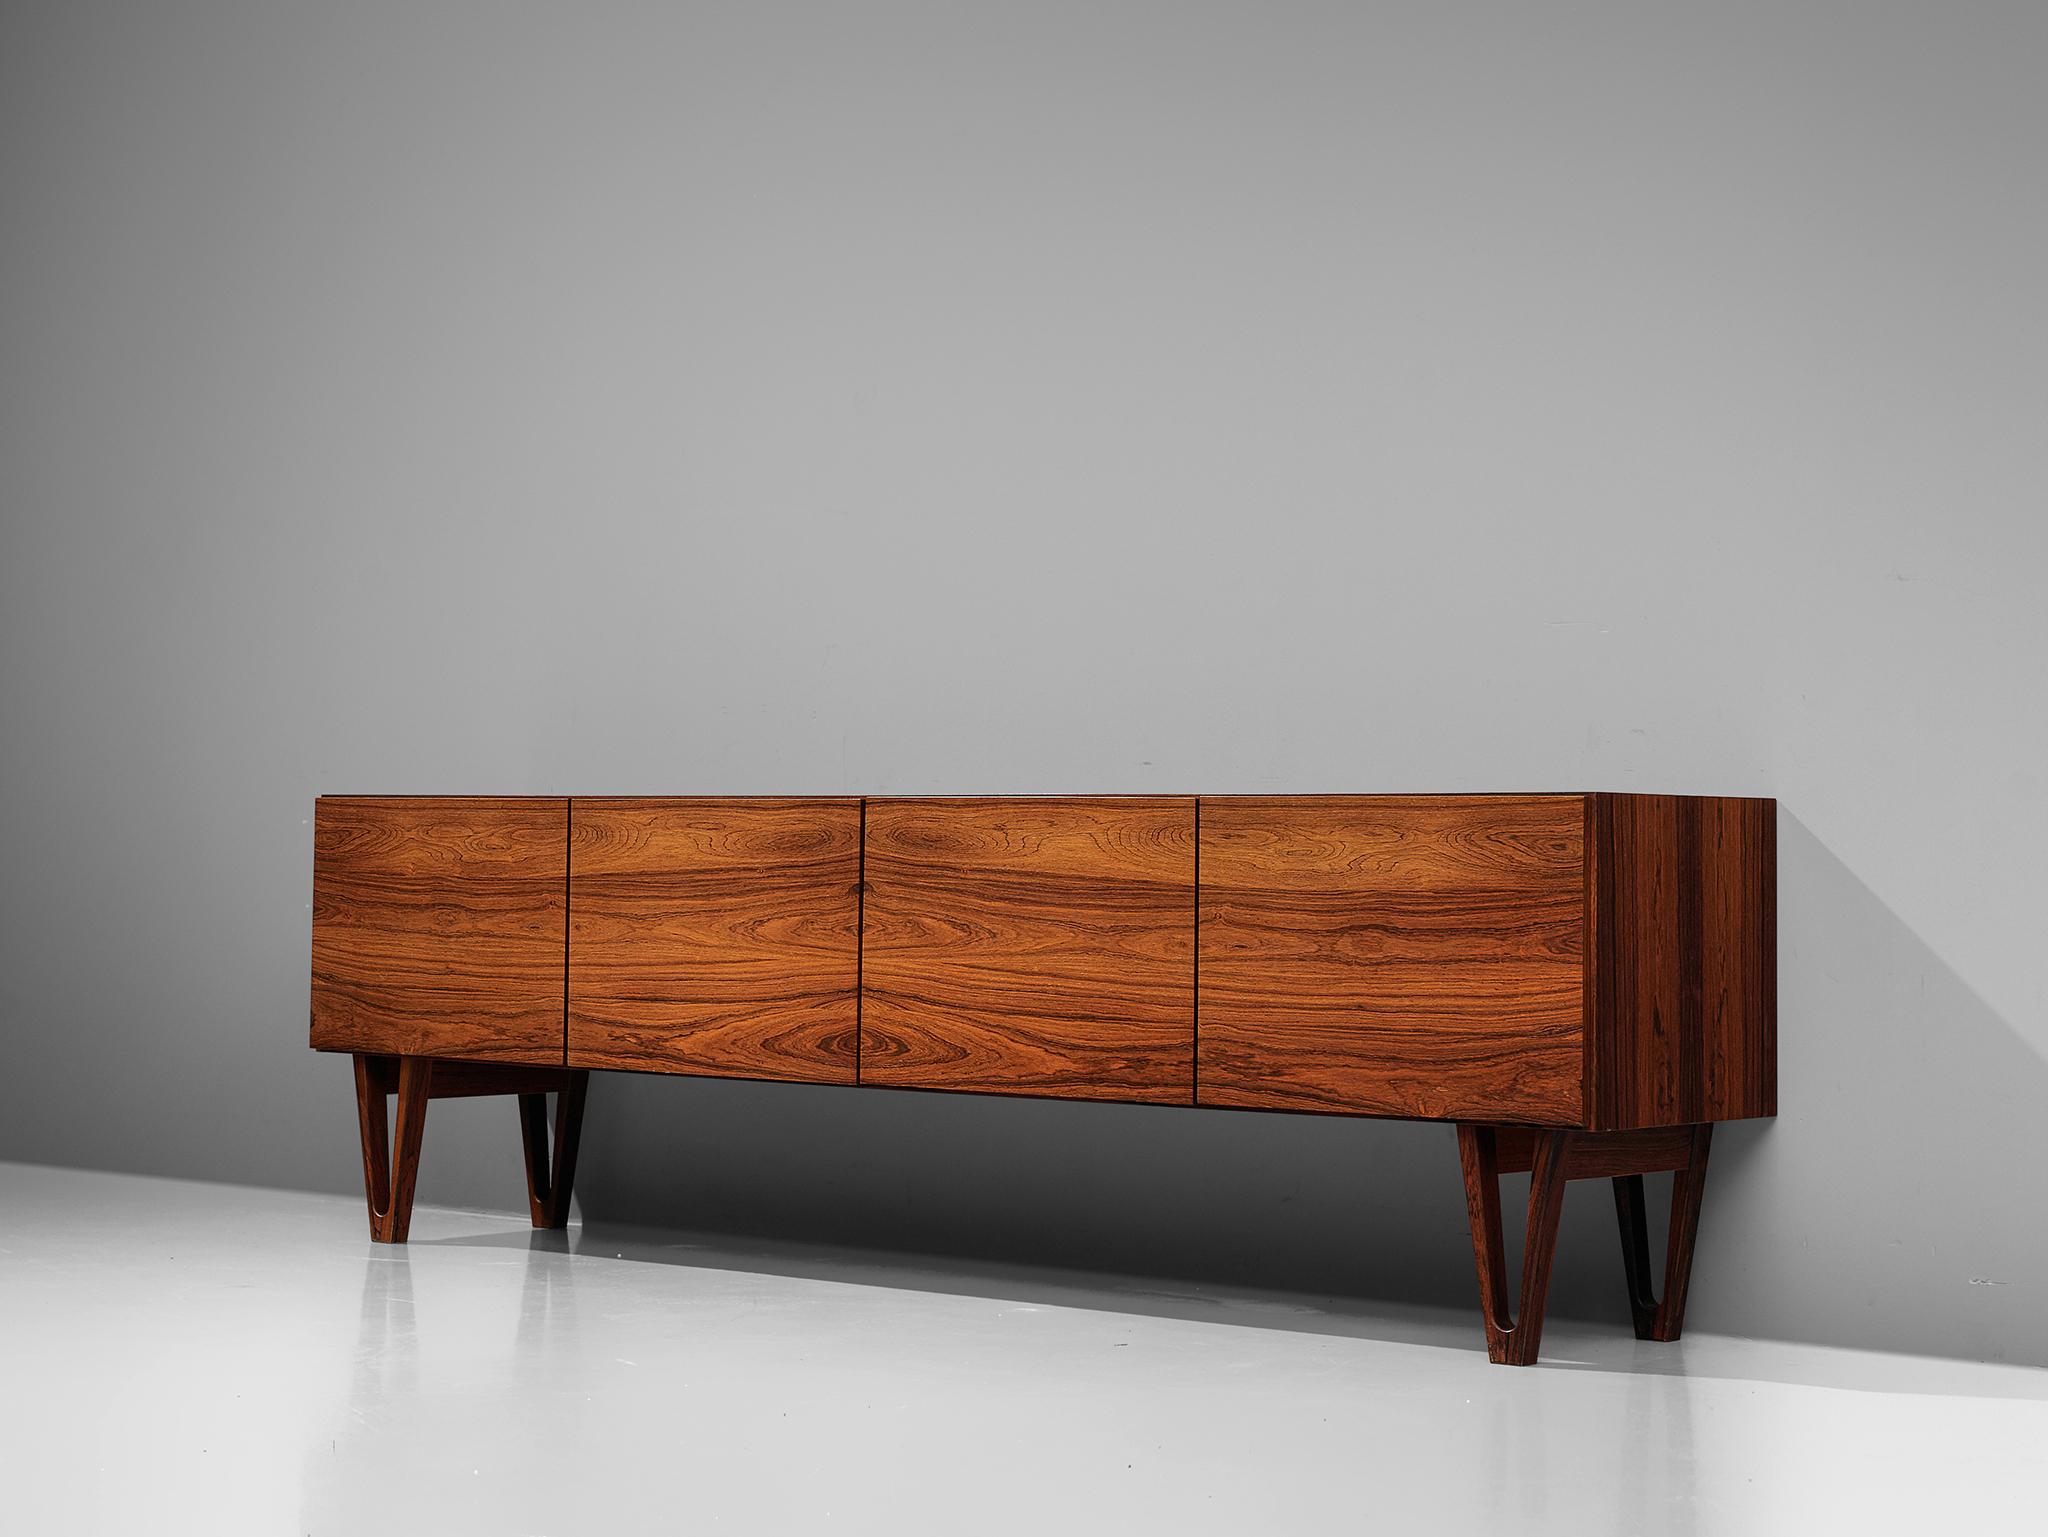 Ib Kofod-Larsen for Brande Møbelfabrik, sideboard, rosewood, Denmark, 1960s.

Wonderful Scandinavian Modern sideboard by Ib Kofod-Larsen. The sideboard is executed in rosewood and contains four doors in the front. Behind these doors you'll find an